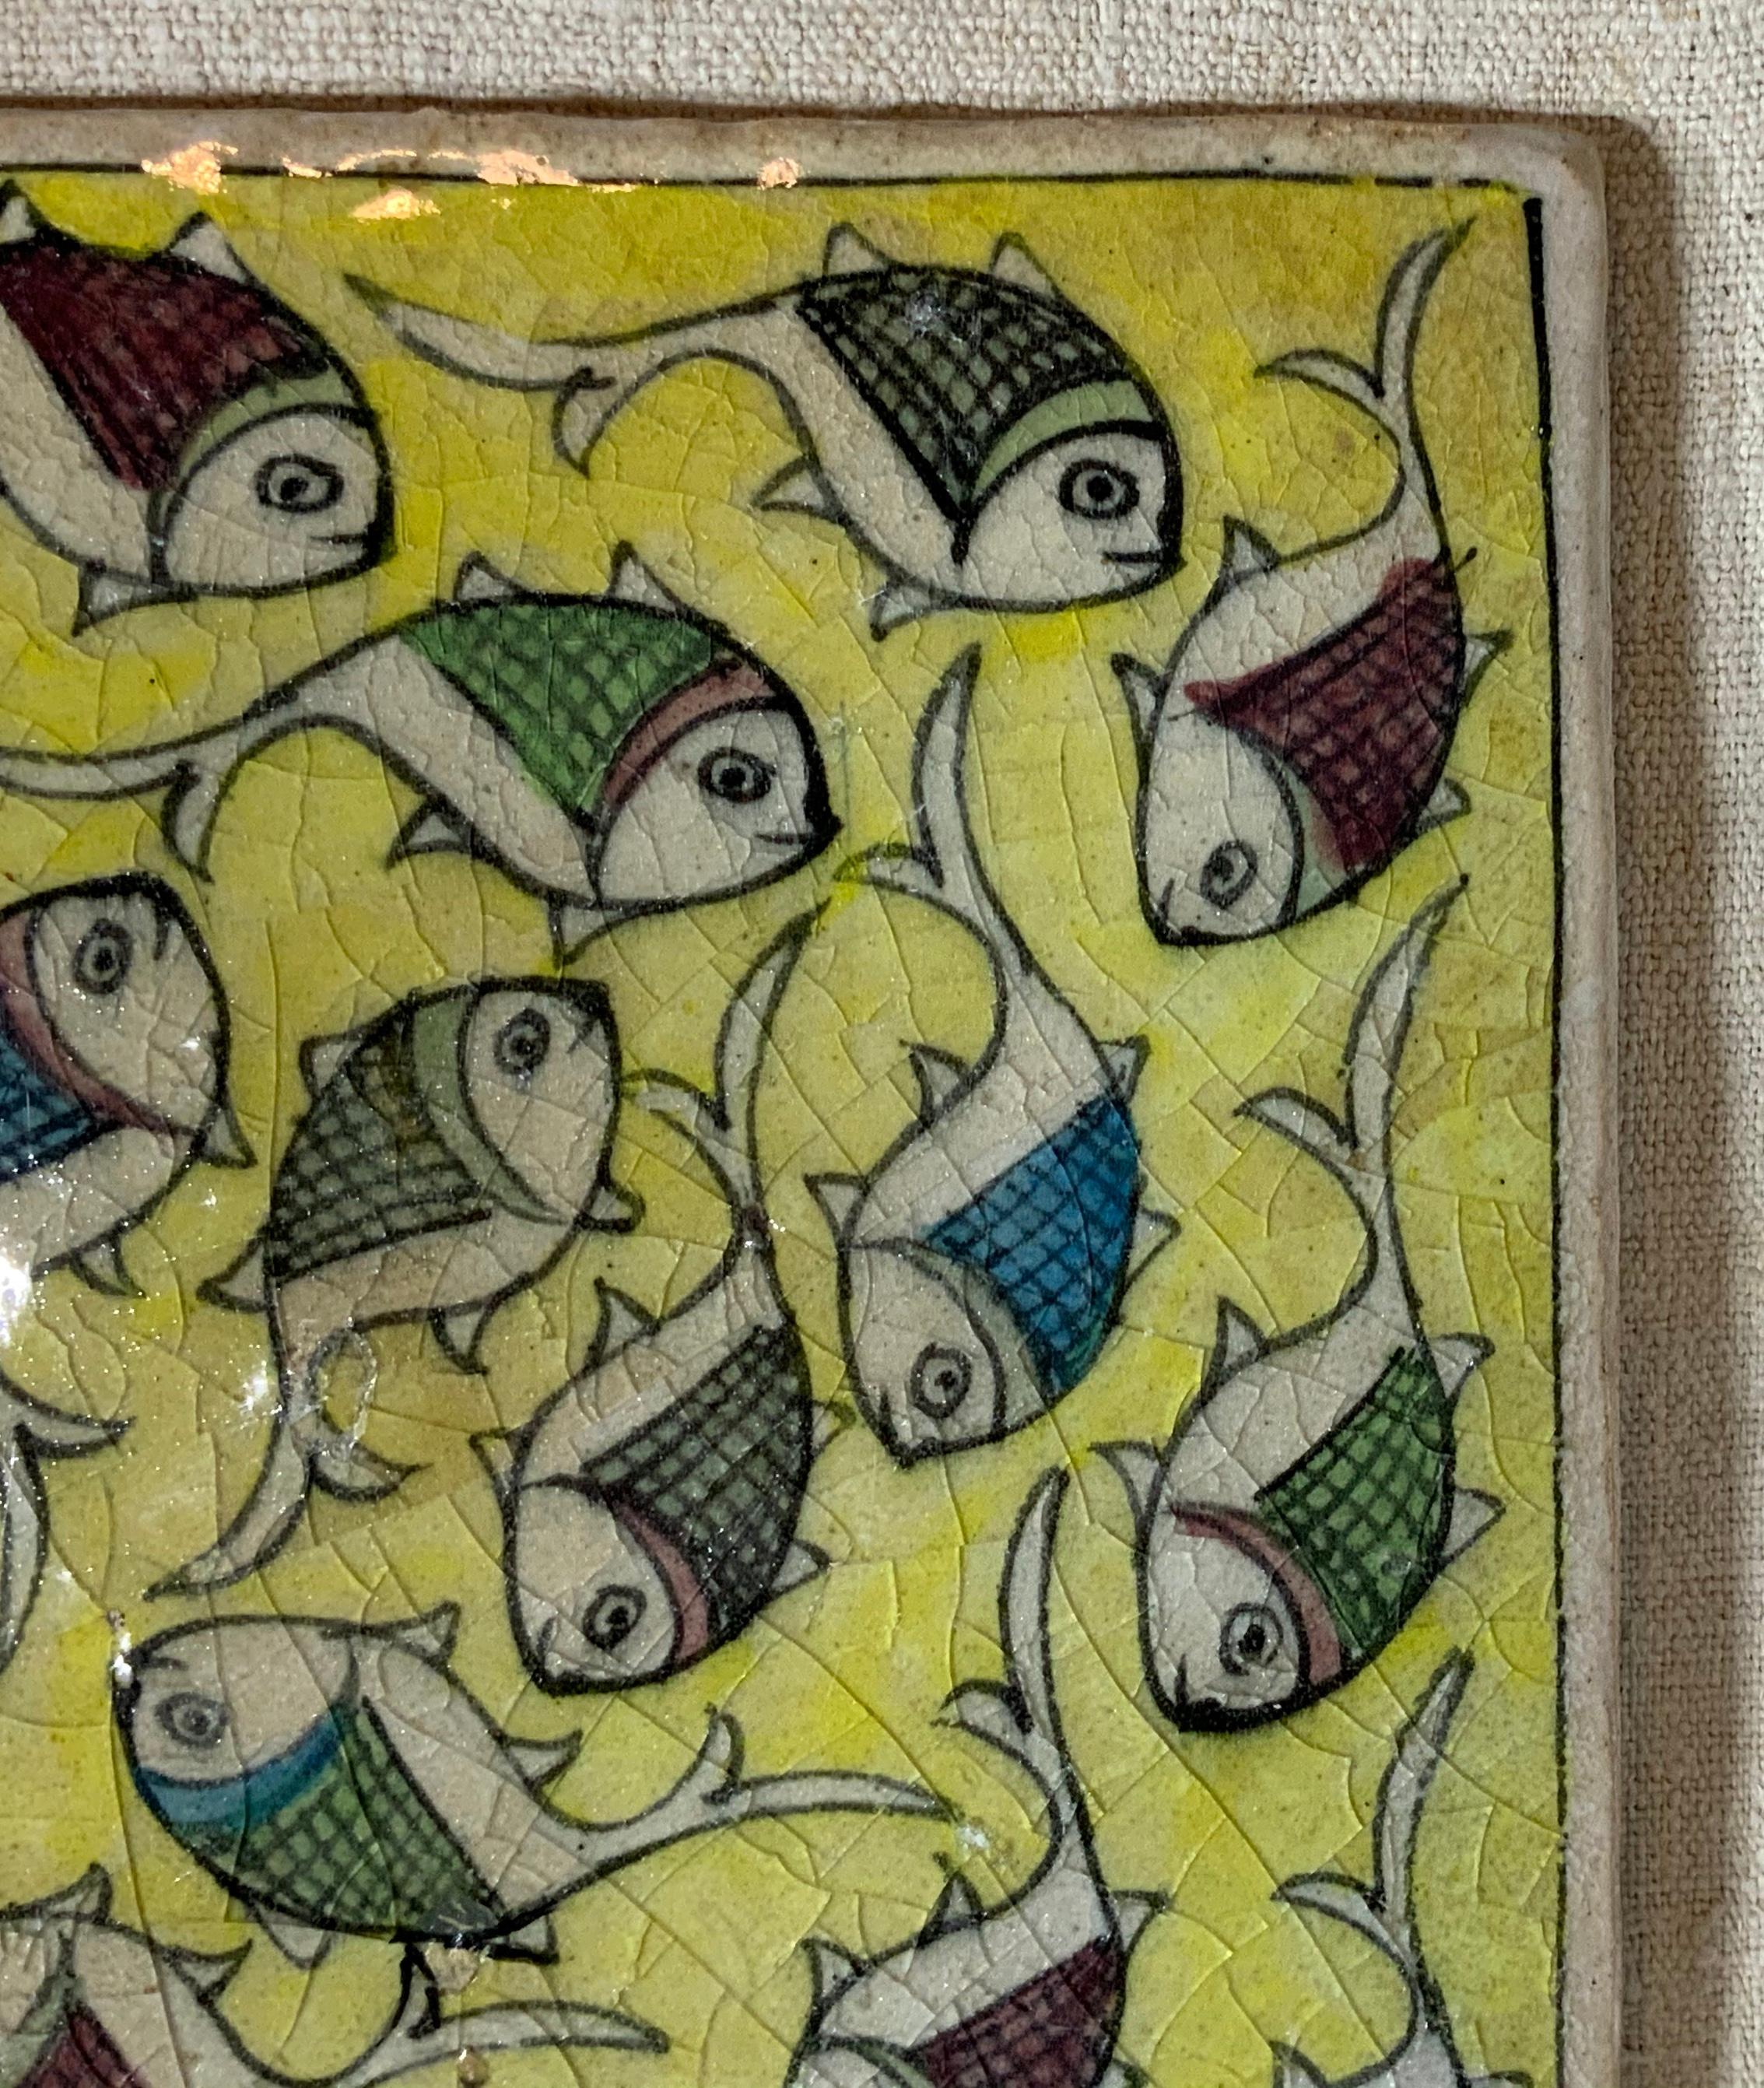 Beautiful Persian tile hand painted and glazed with exceptional wondering school of colorful fish, on yellow color background.
The tile can hang on the wall, or display on wood stand, wood stand is not included.